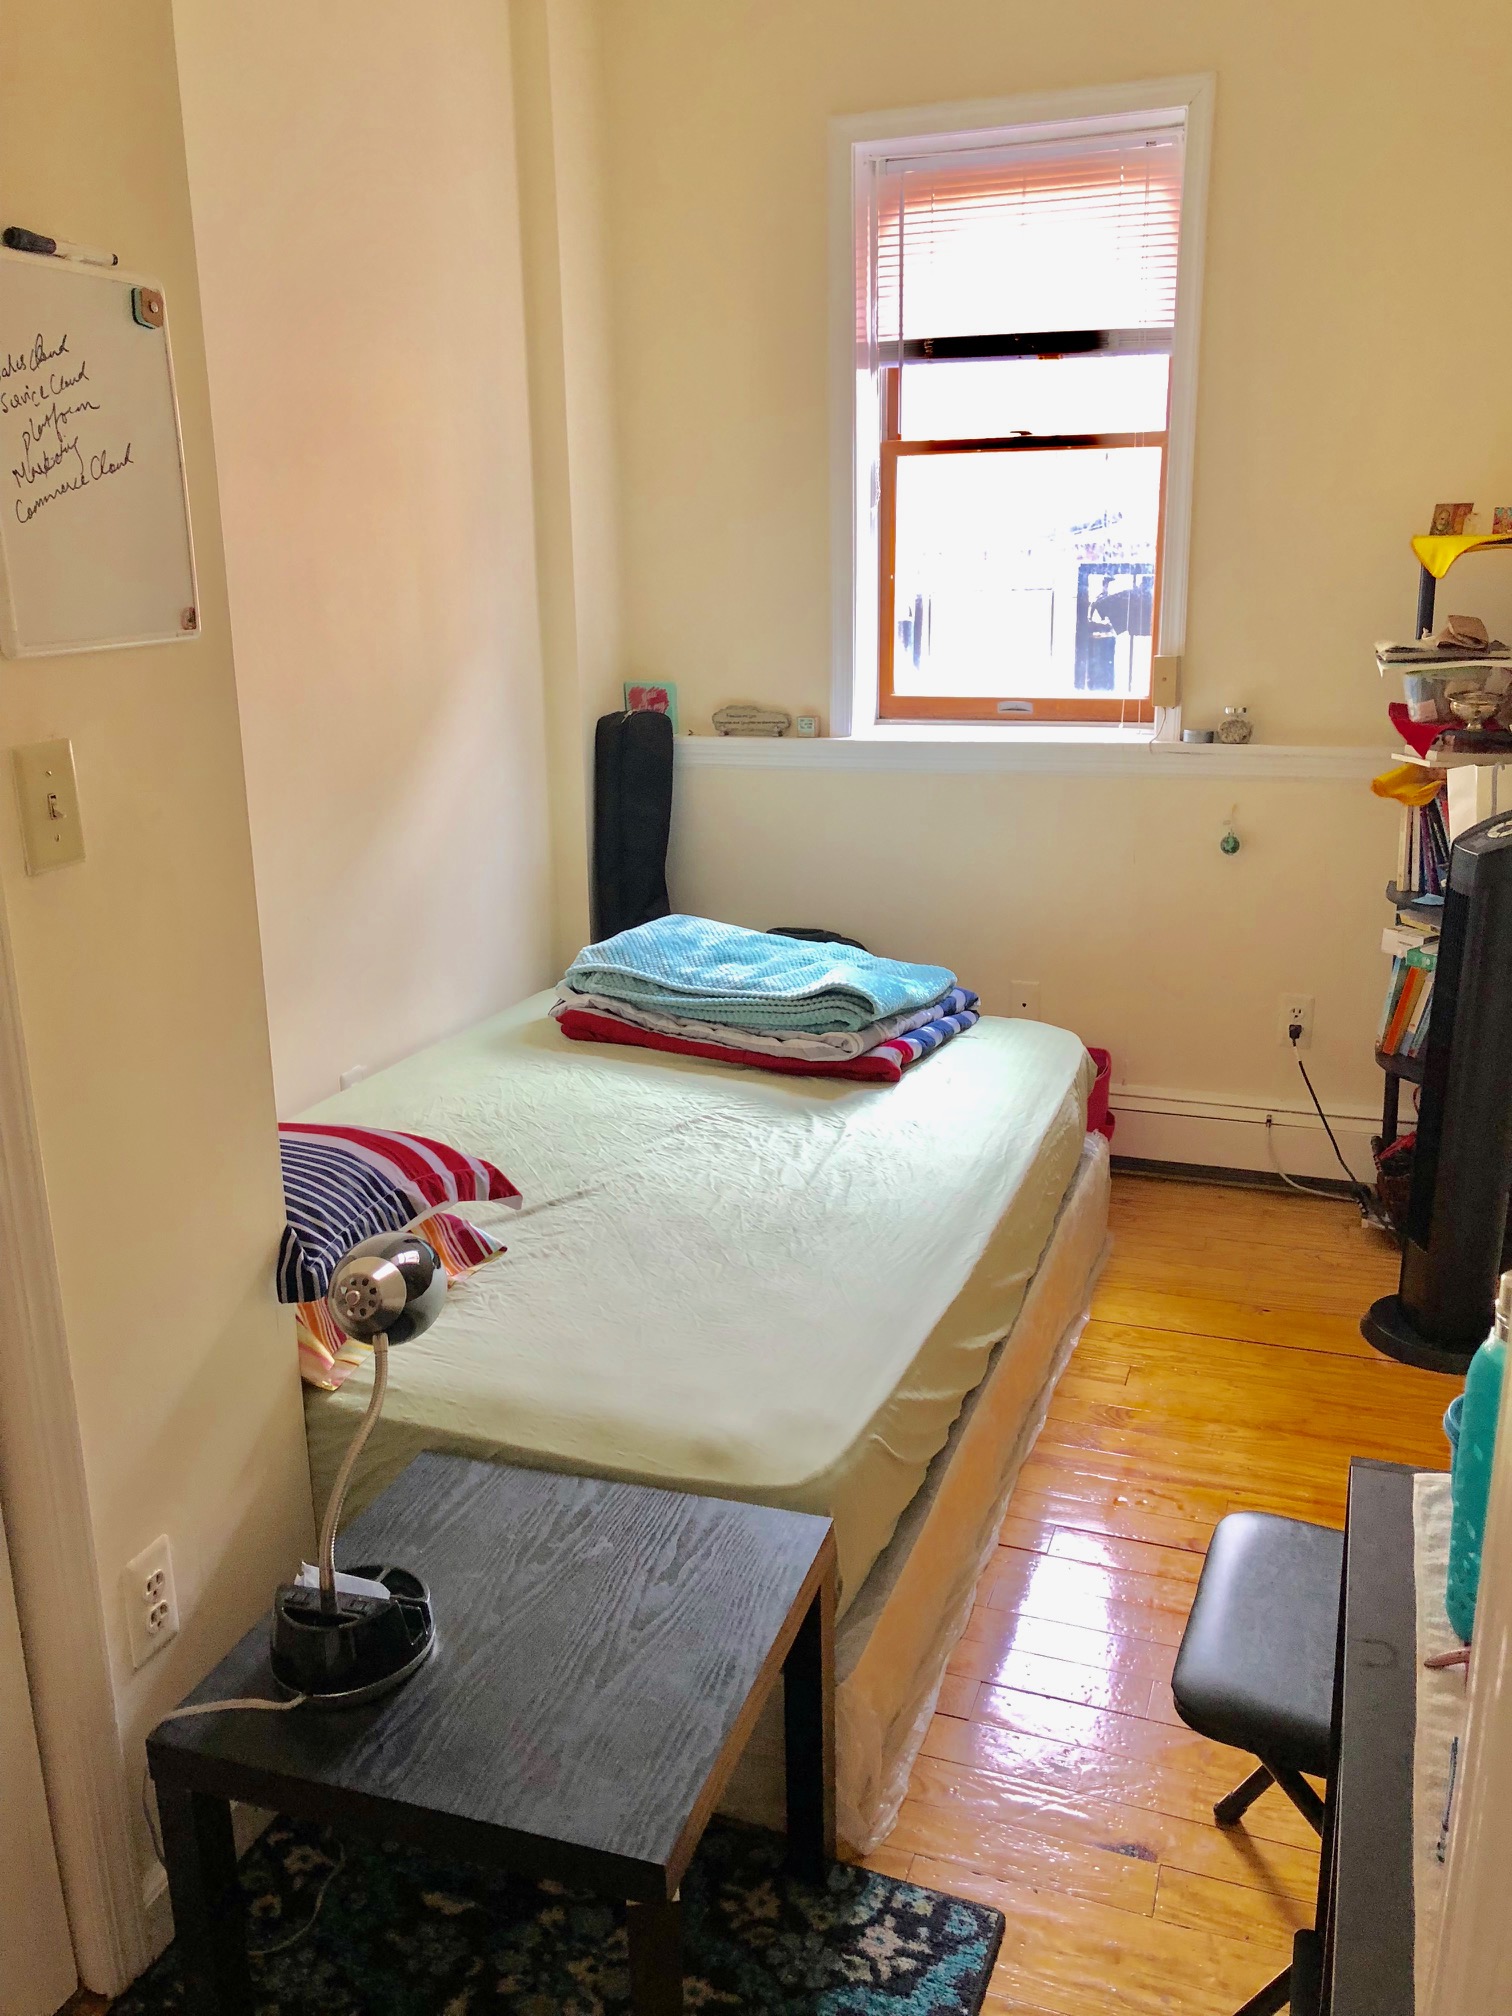 No broker fee! Great location for this 2 bed 1 bath on desirable bloomfield street. Property features: hardwoods floors, gas stove, and a nice open living room. Available May 1st. No pets.